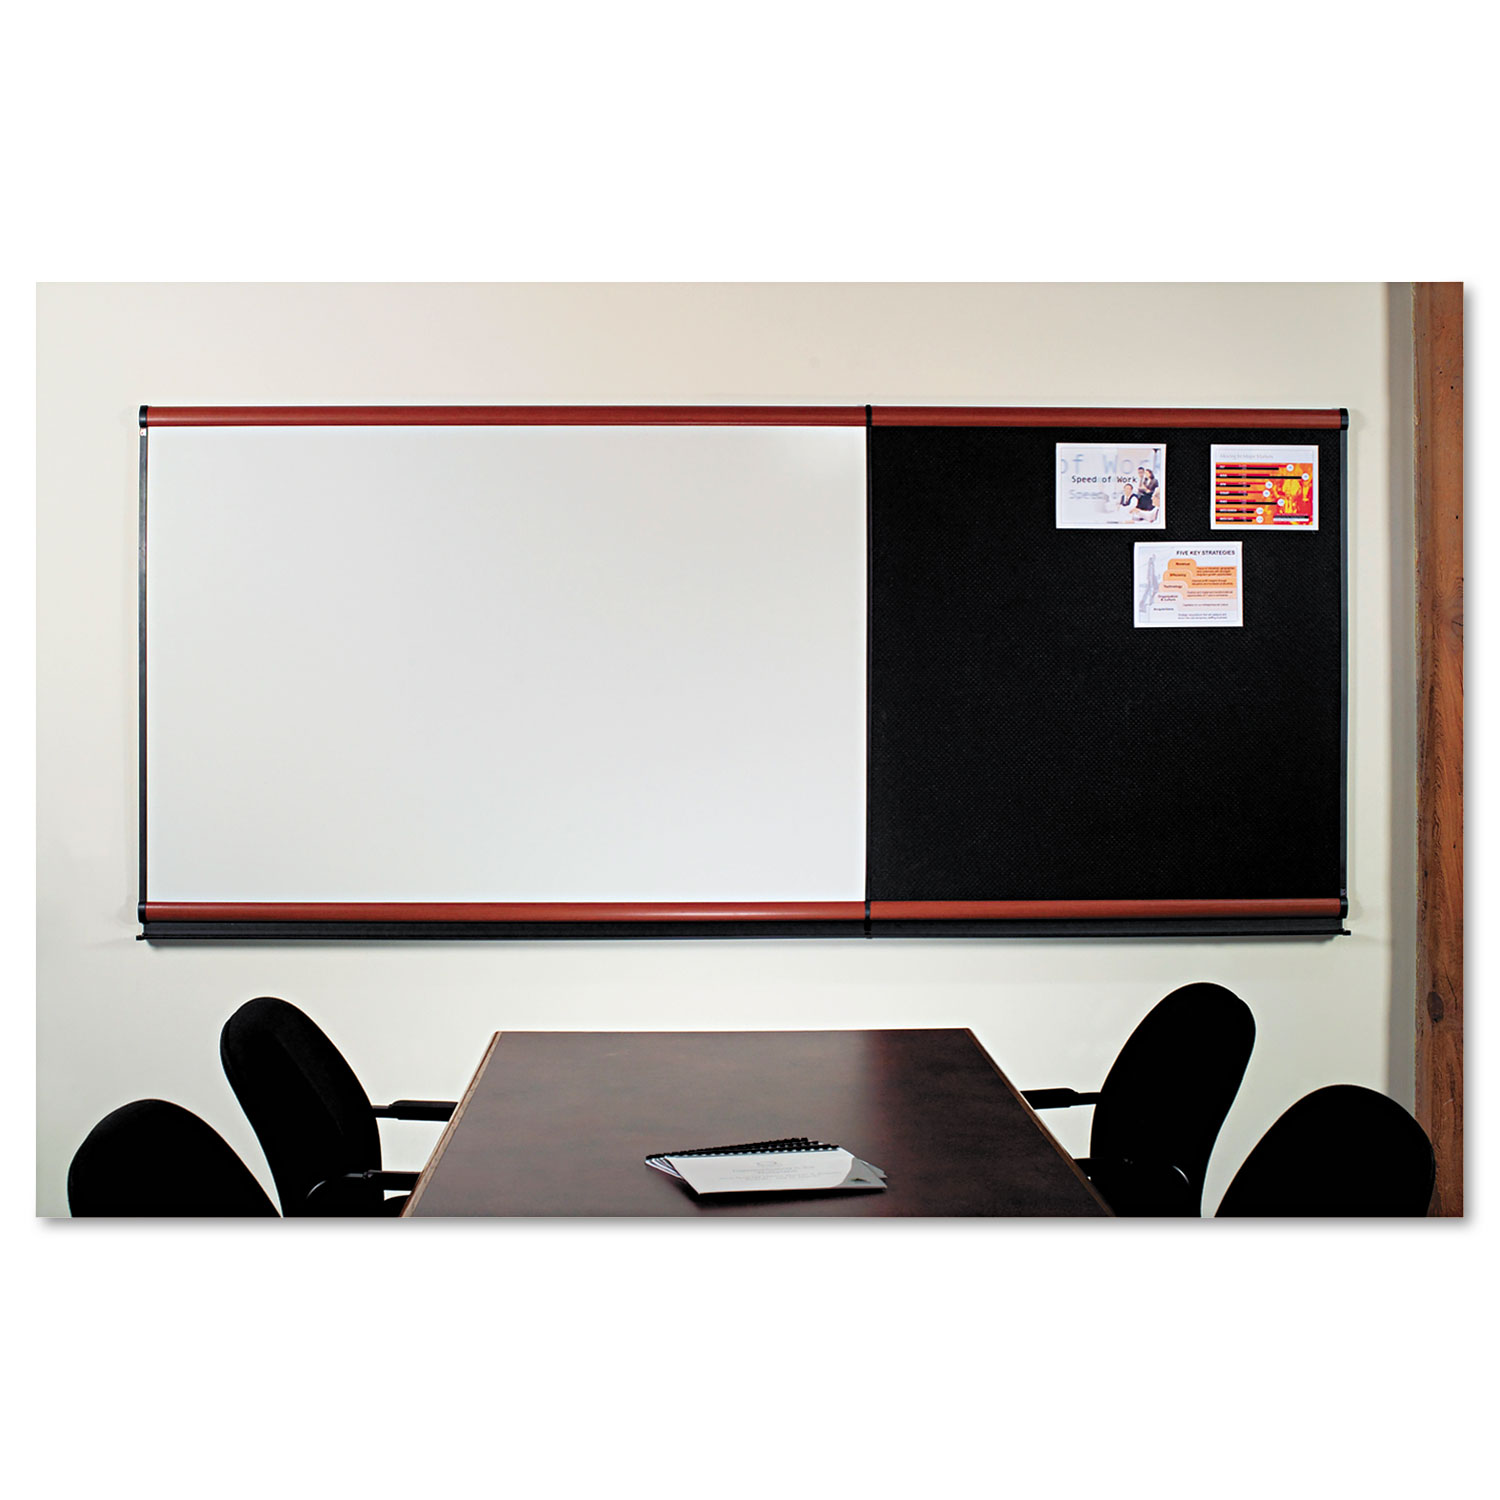 Connectables Modular Dry-Erase Board, Porcelain/Steel, 72 x 48, White, Mahogany